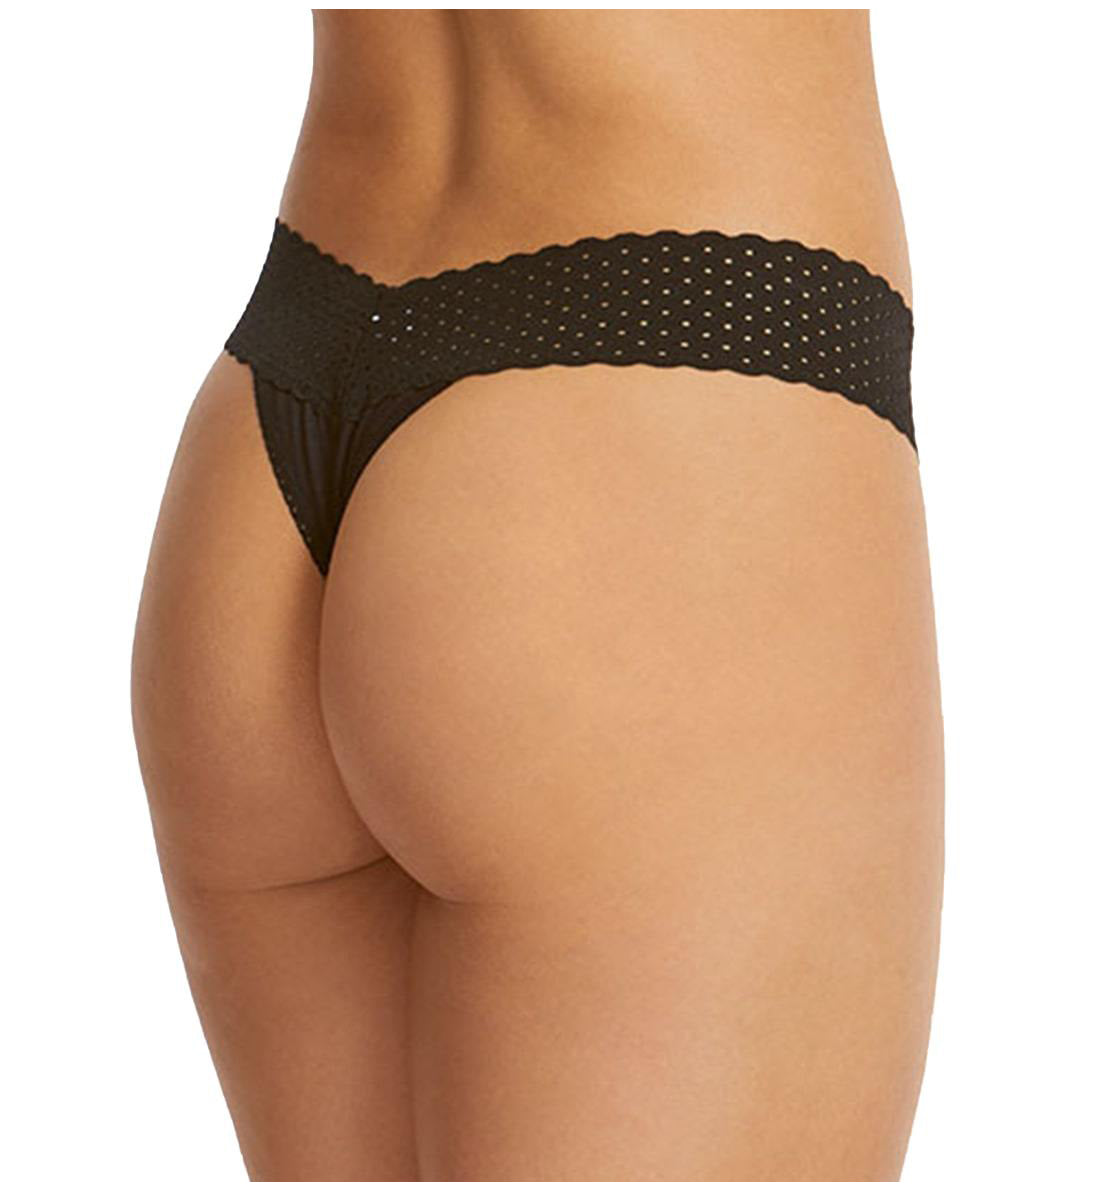 Hanky Panky Organic Cotton Low Rise Thong with Lace (791001),Black - Black,One Size